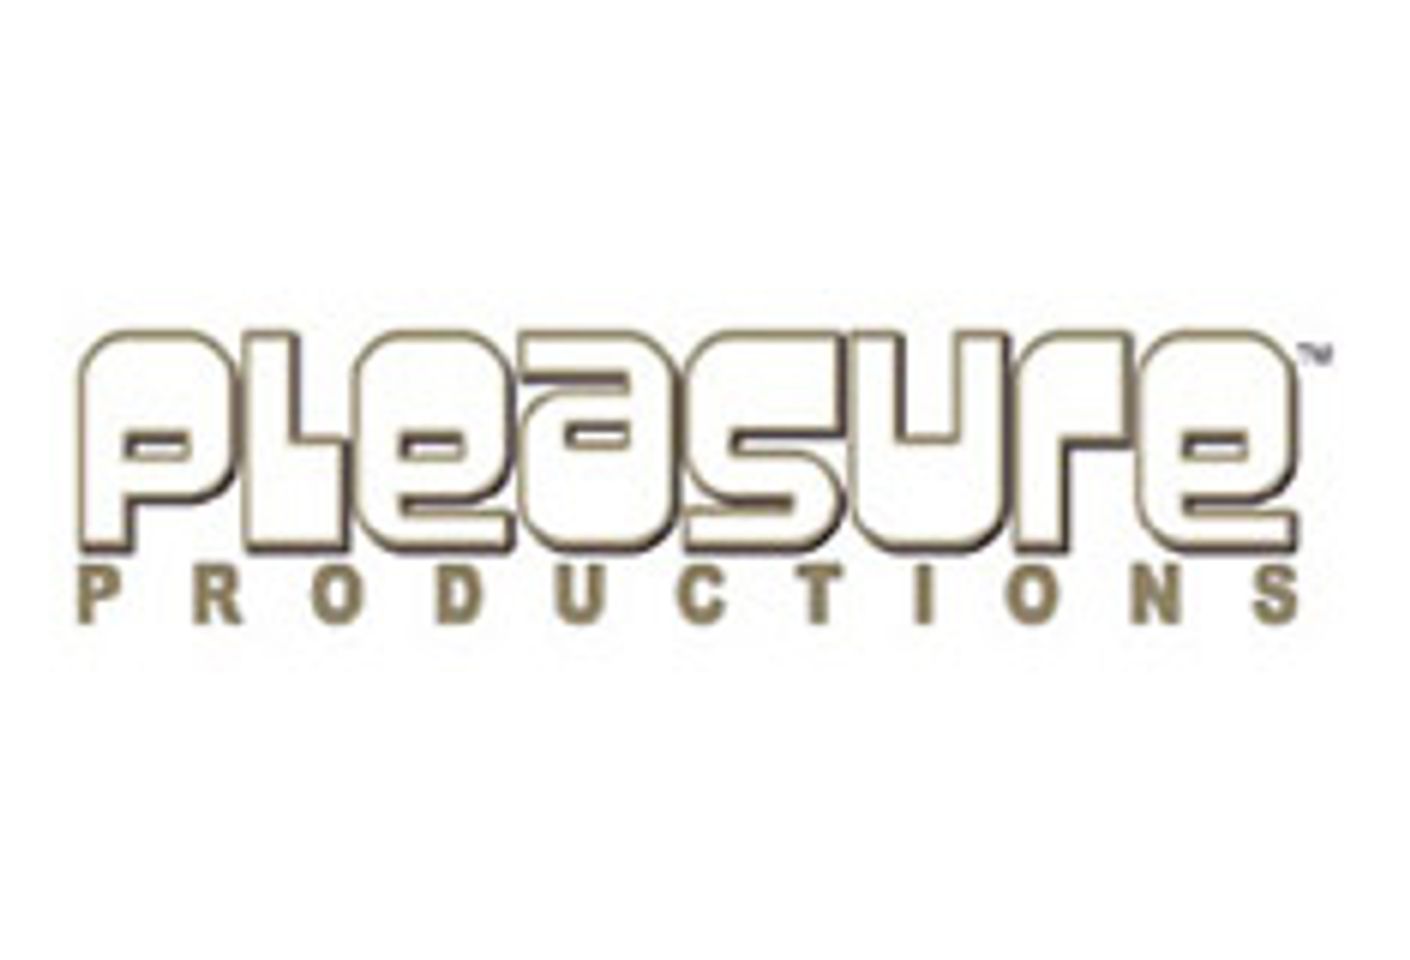 Pleasure Productions Makes Move With 100 Catalogue Titles